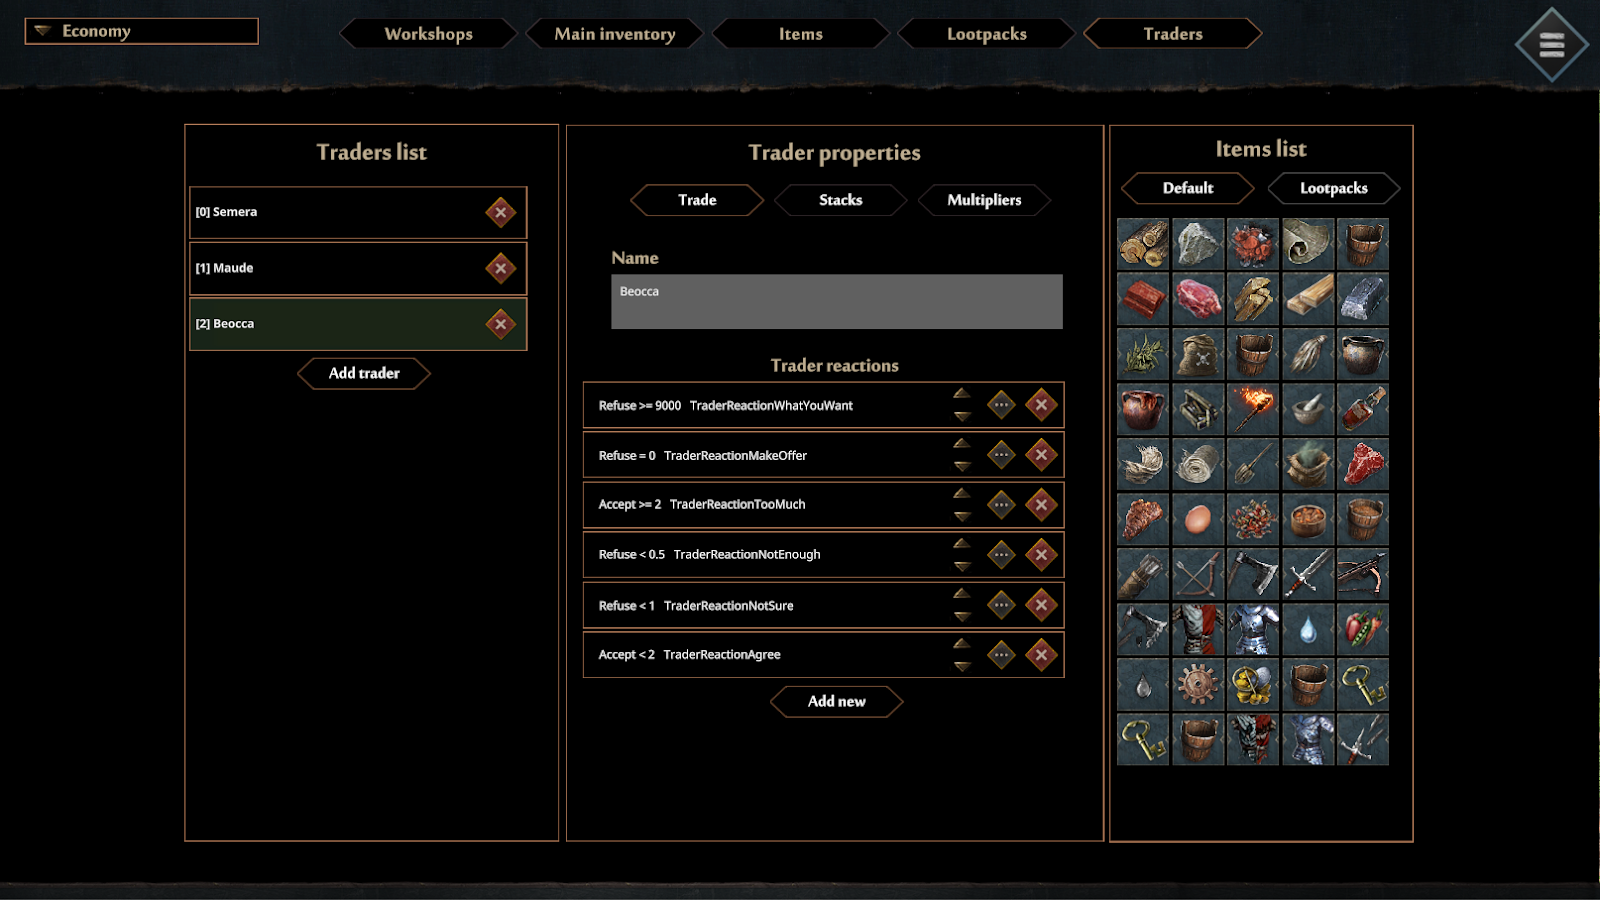 There are three traders in the game, each one with different needs and prices